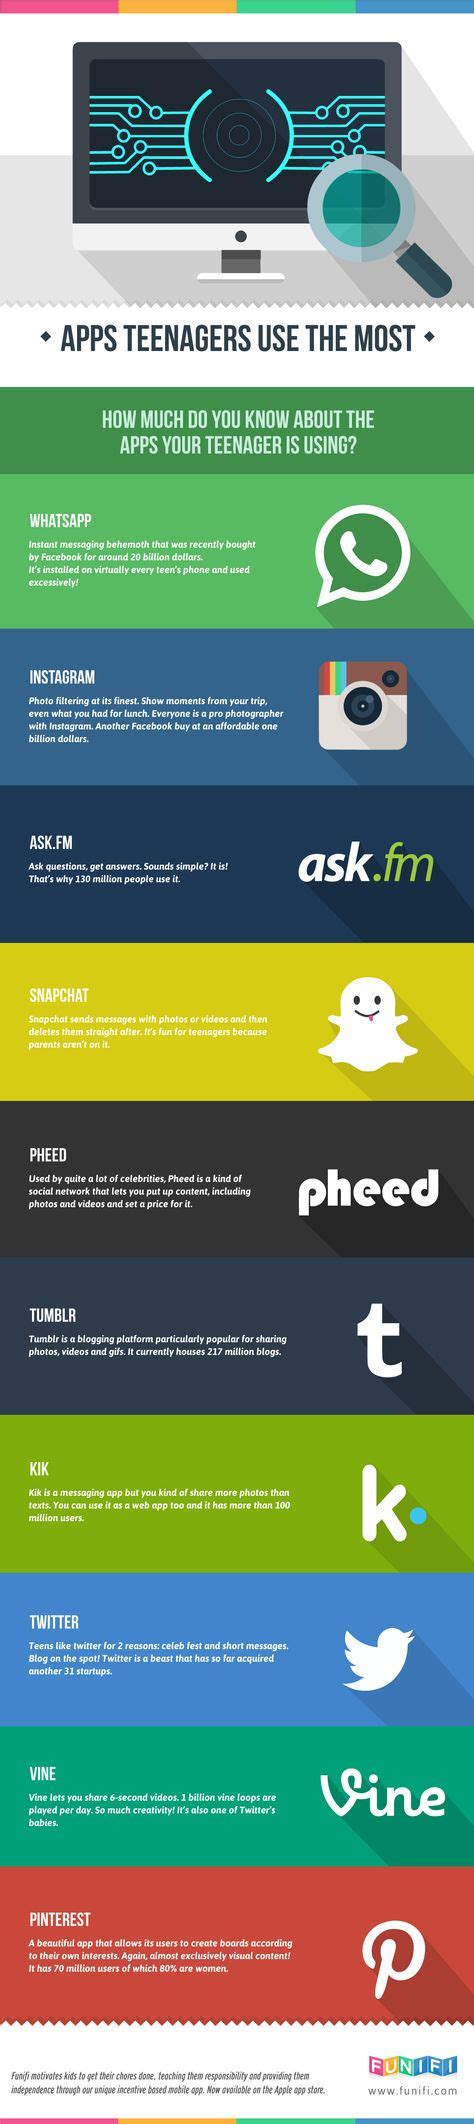 The Top 10 Most Used Apps By Teenagers Infographic Infographic